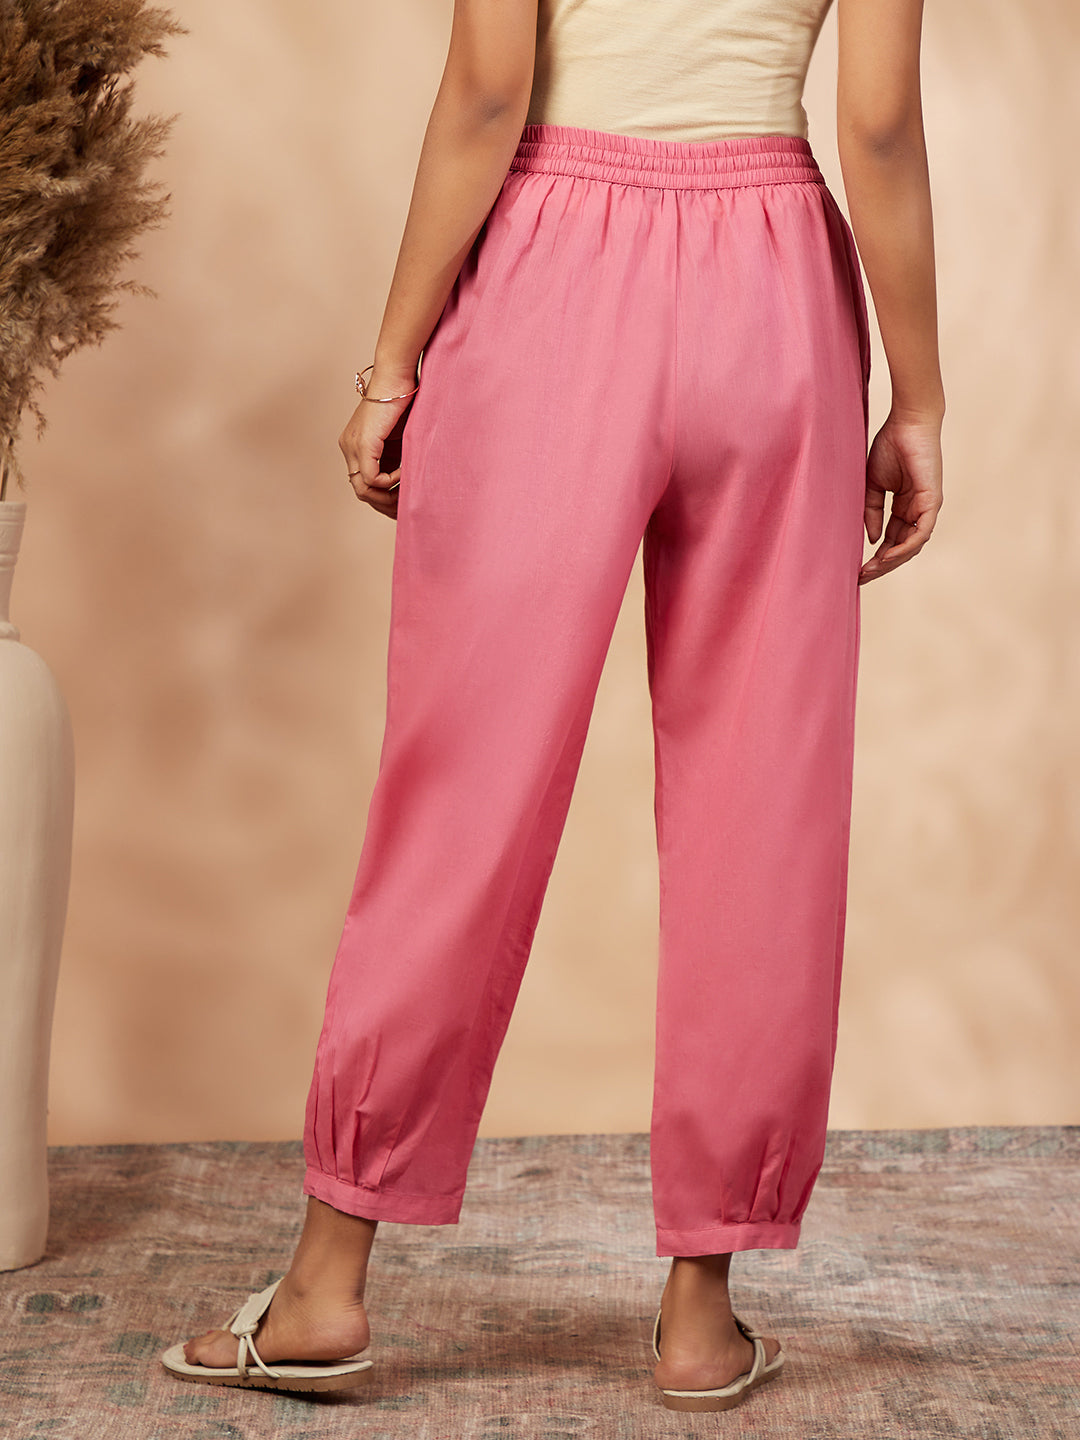 Women's Solid Coral Straight Pant - IMARA